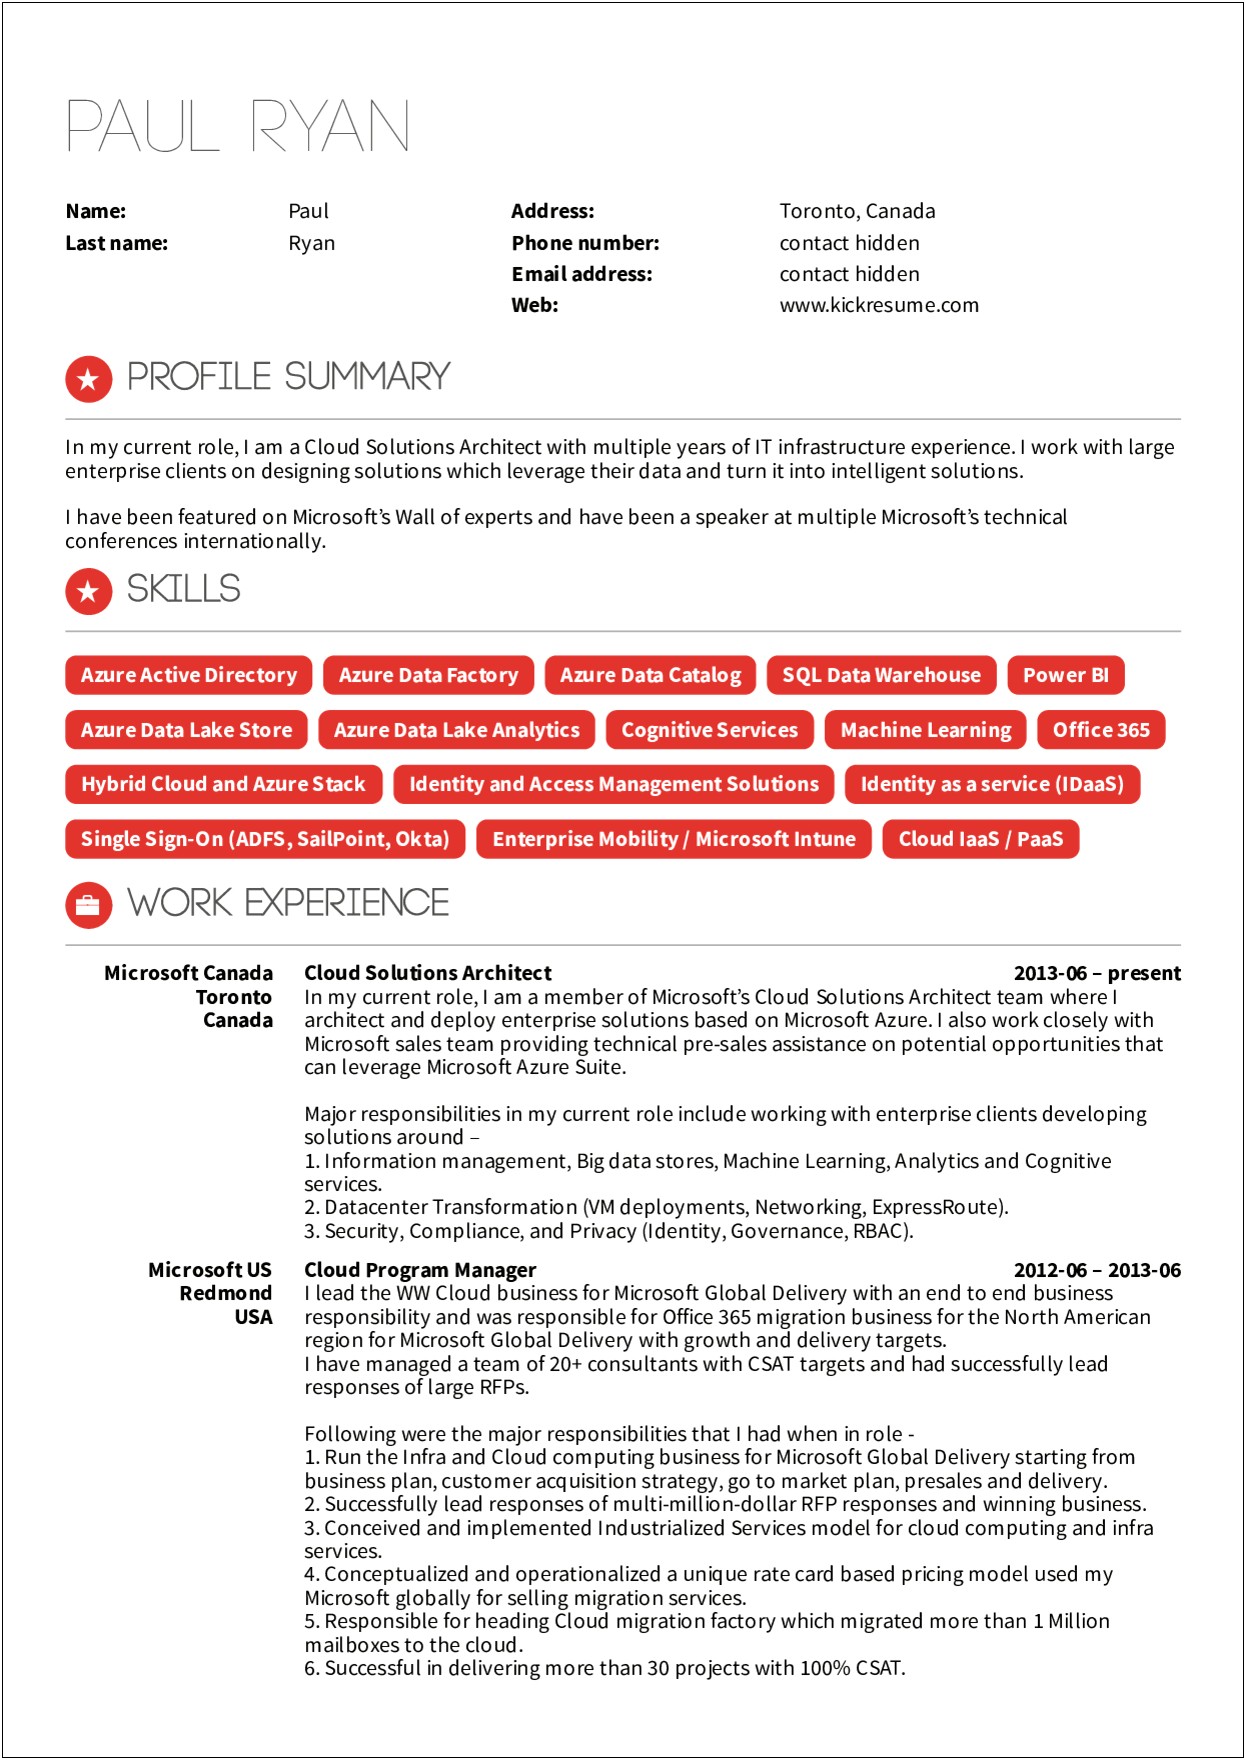 Resume Explains Employment Gap In Resume Objective